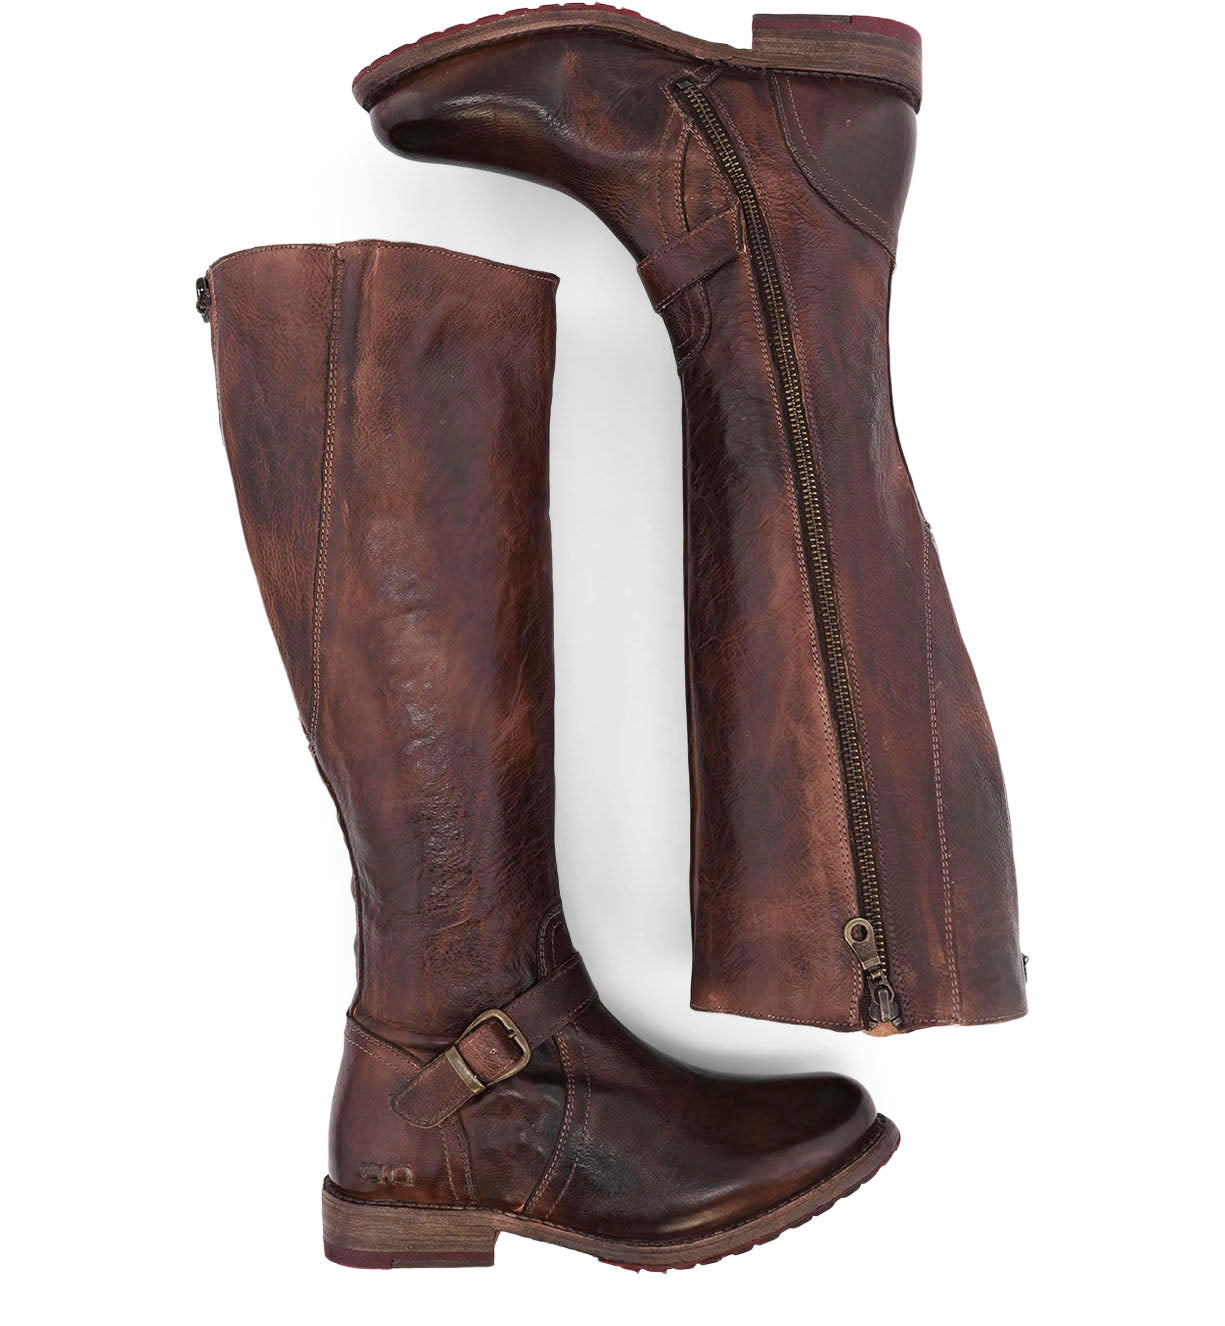 A pair of Bed Stu Glaye Wide Calf women's brown riding boots.